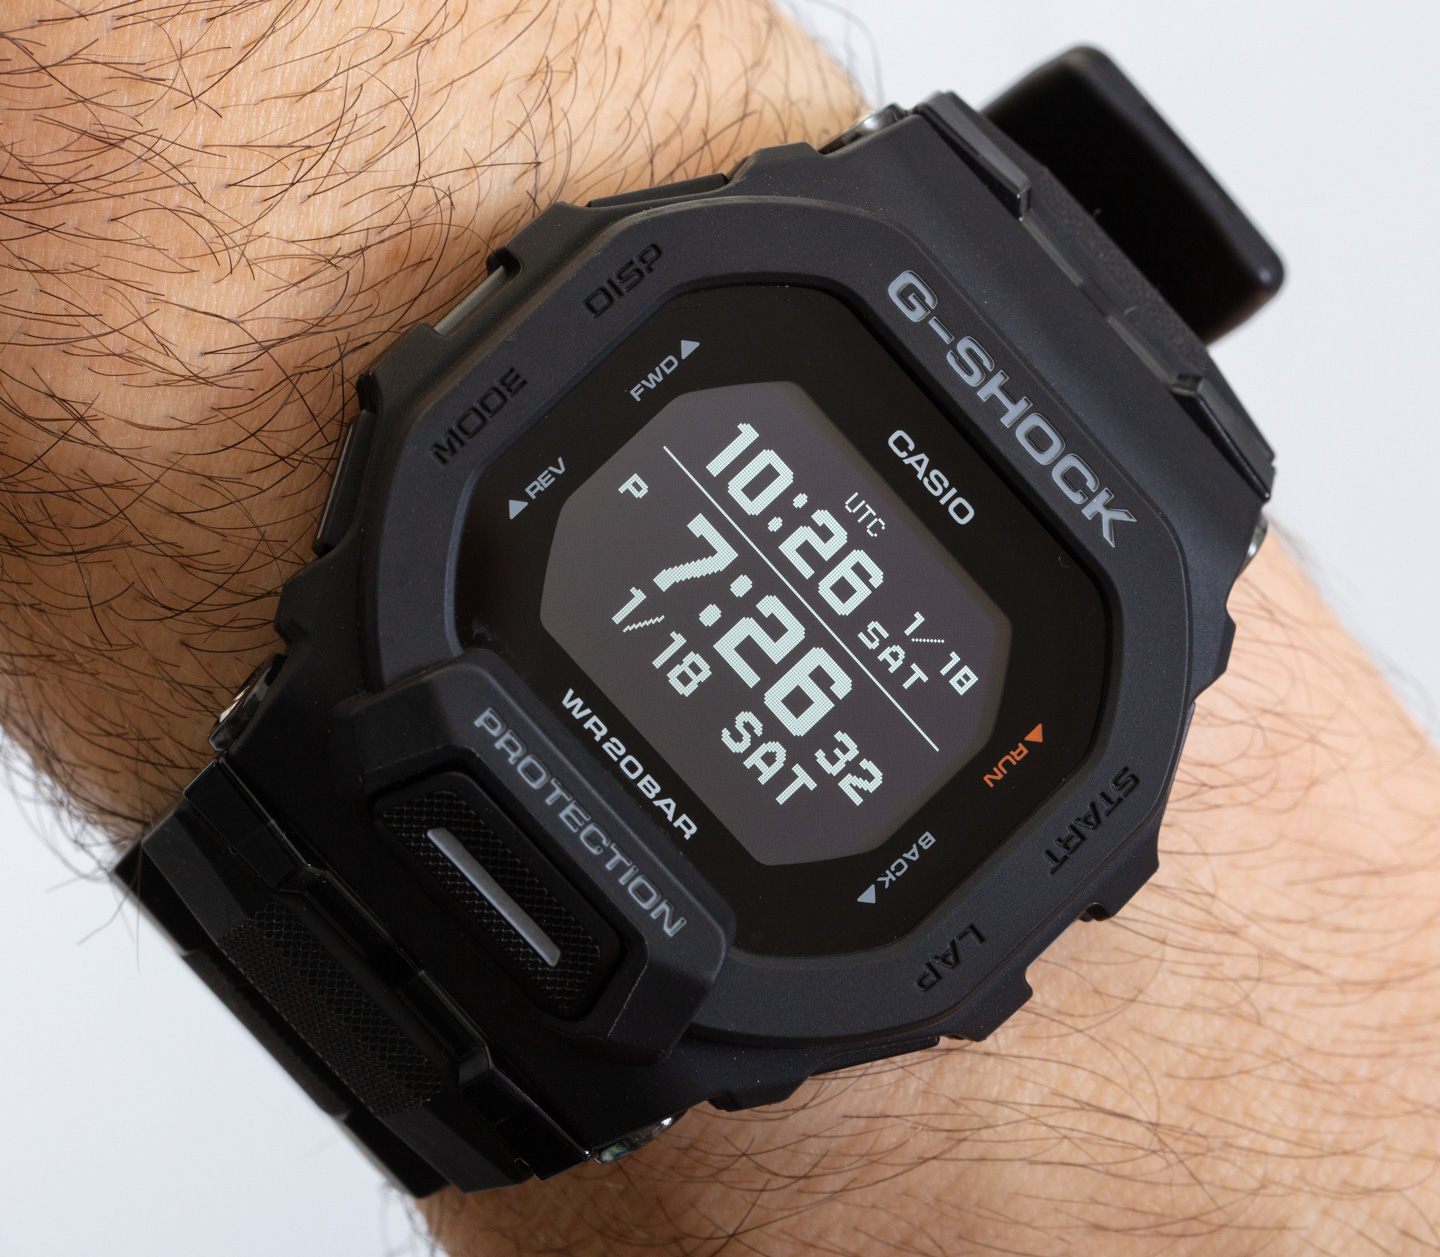 Review: Entry-Level G-Shock MOVE | Watch GBD200 Bluetooth Casio aBlogtoWatch MiP